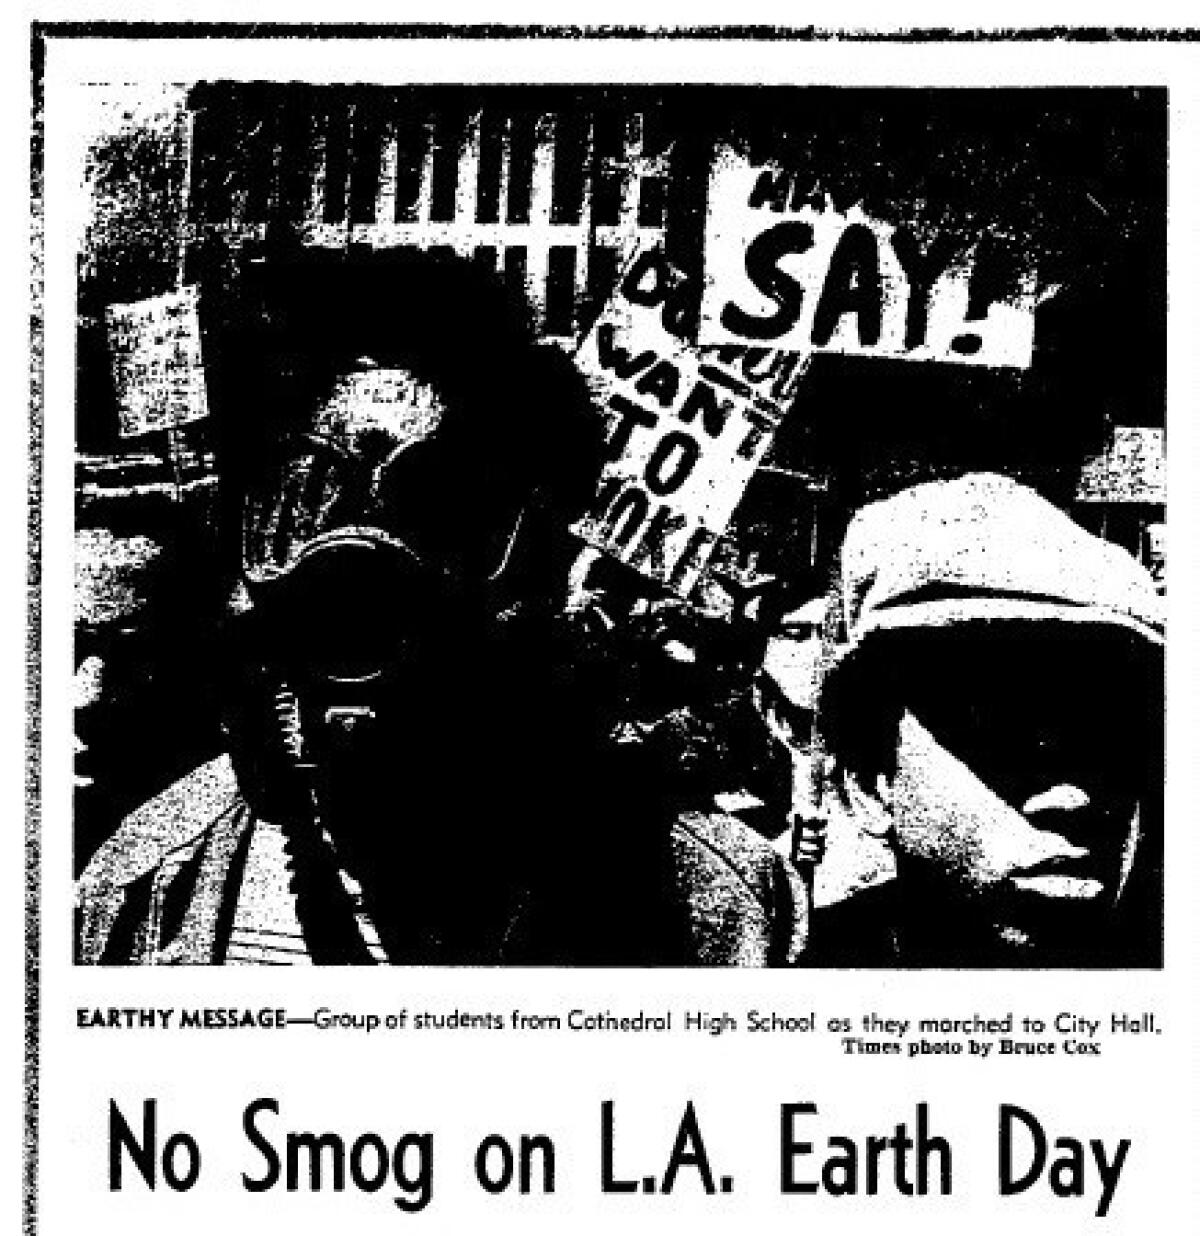 A story from the April 23, 1970 edition of the Los Angeles Times describes various oddities that occurred around Los Angeles, including, the story noted, a lack of smog.